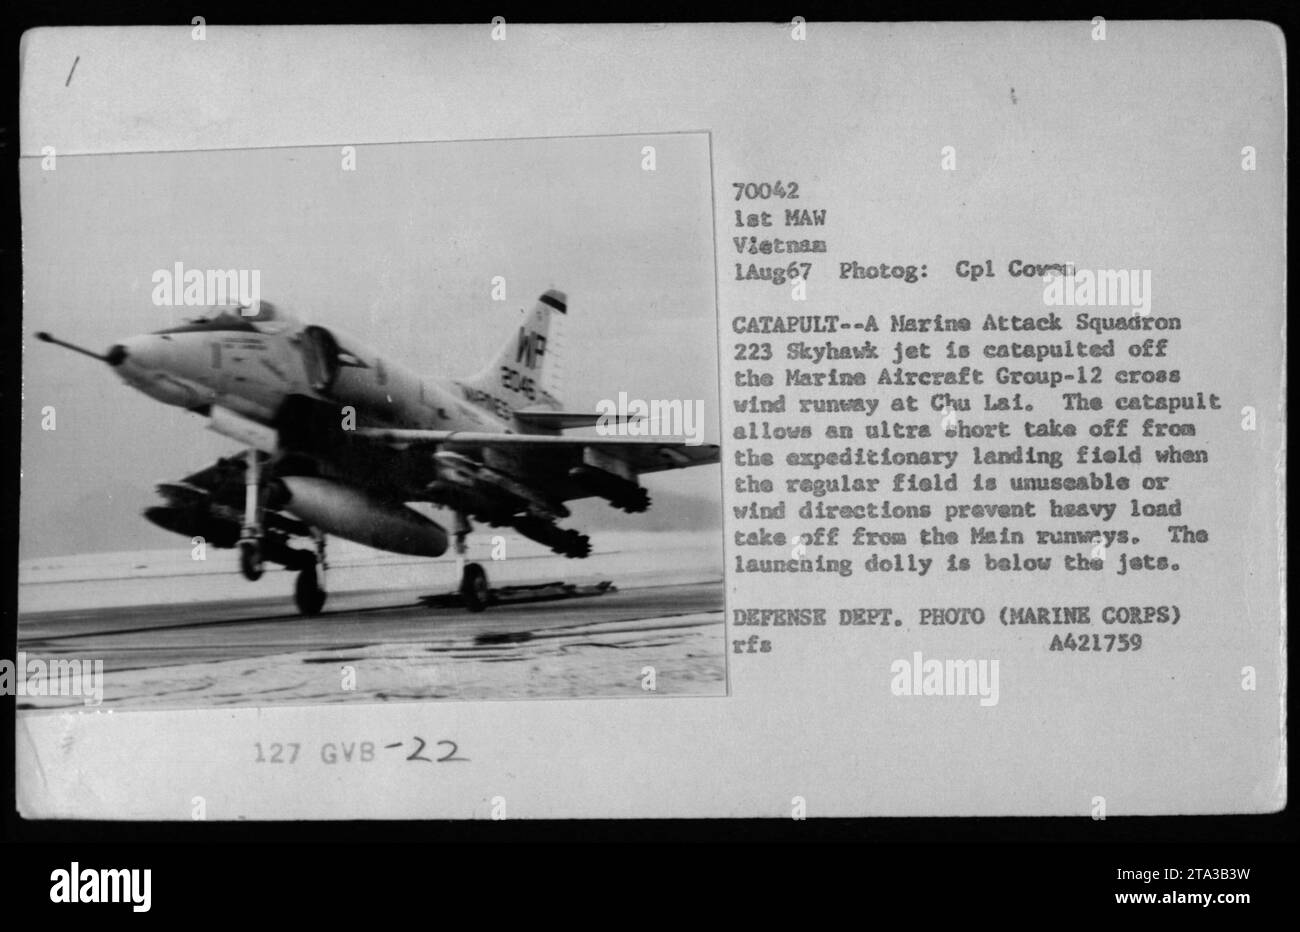 A Marine Attack Squadron 223 Skyhawk jet is catapulted off the crosswind runway at Chu Lai, Vietnam on August 1, 1967. The catapult allows for an ultra-short takeoff when the regular field is unusable or when wind directions prevent heavy load takeoffs from the main runways. The launching dolly is visible below the jets in the image. This photograph is an official Defense Department photo taken by Corporal Cowen. Stock Photo